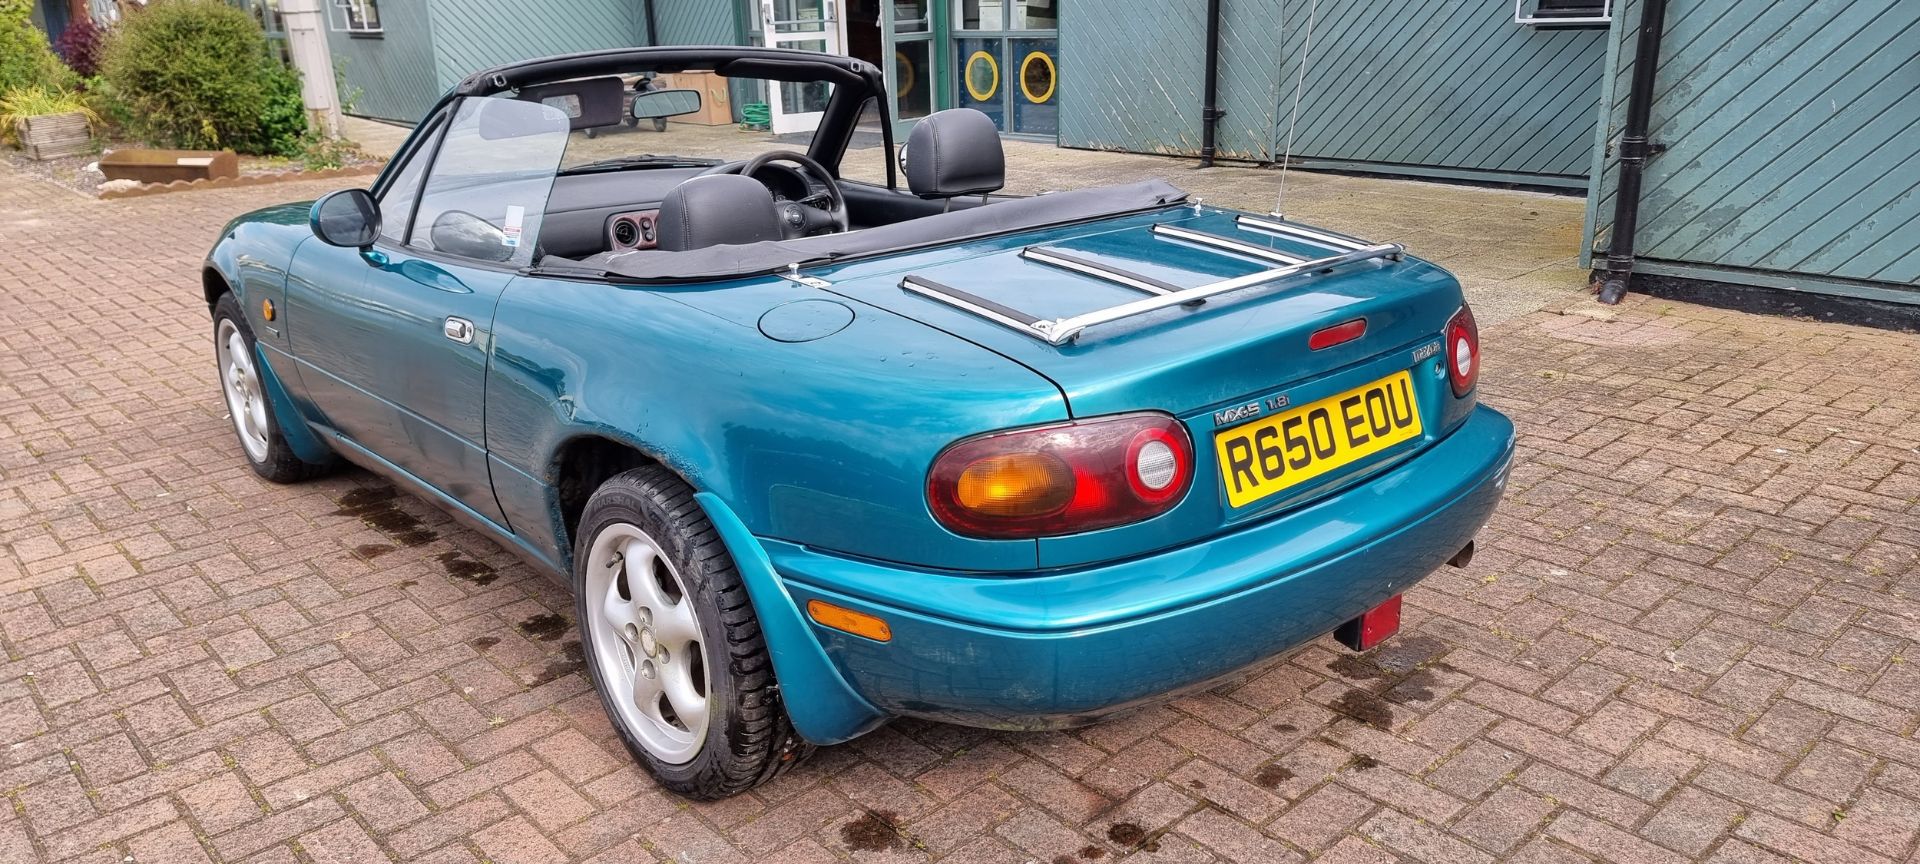 1998 Mazda MX5 Berkeley Limited Edition, 1840cc, project. Registration number R650 EOU. VIN number - Image 4 of 17